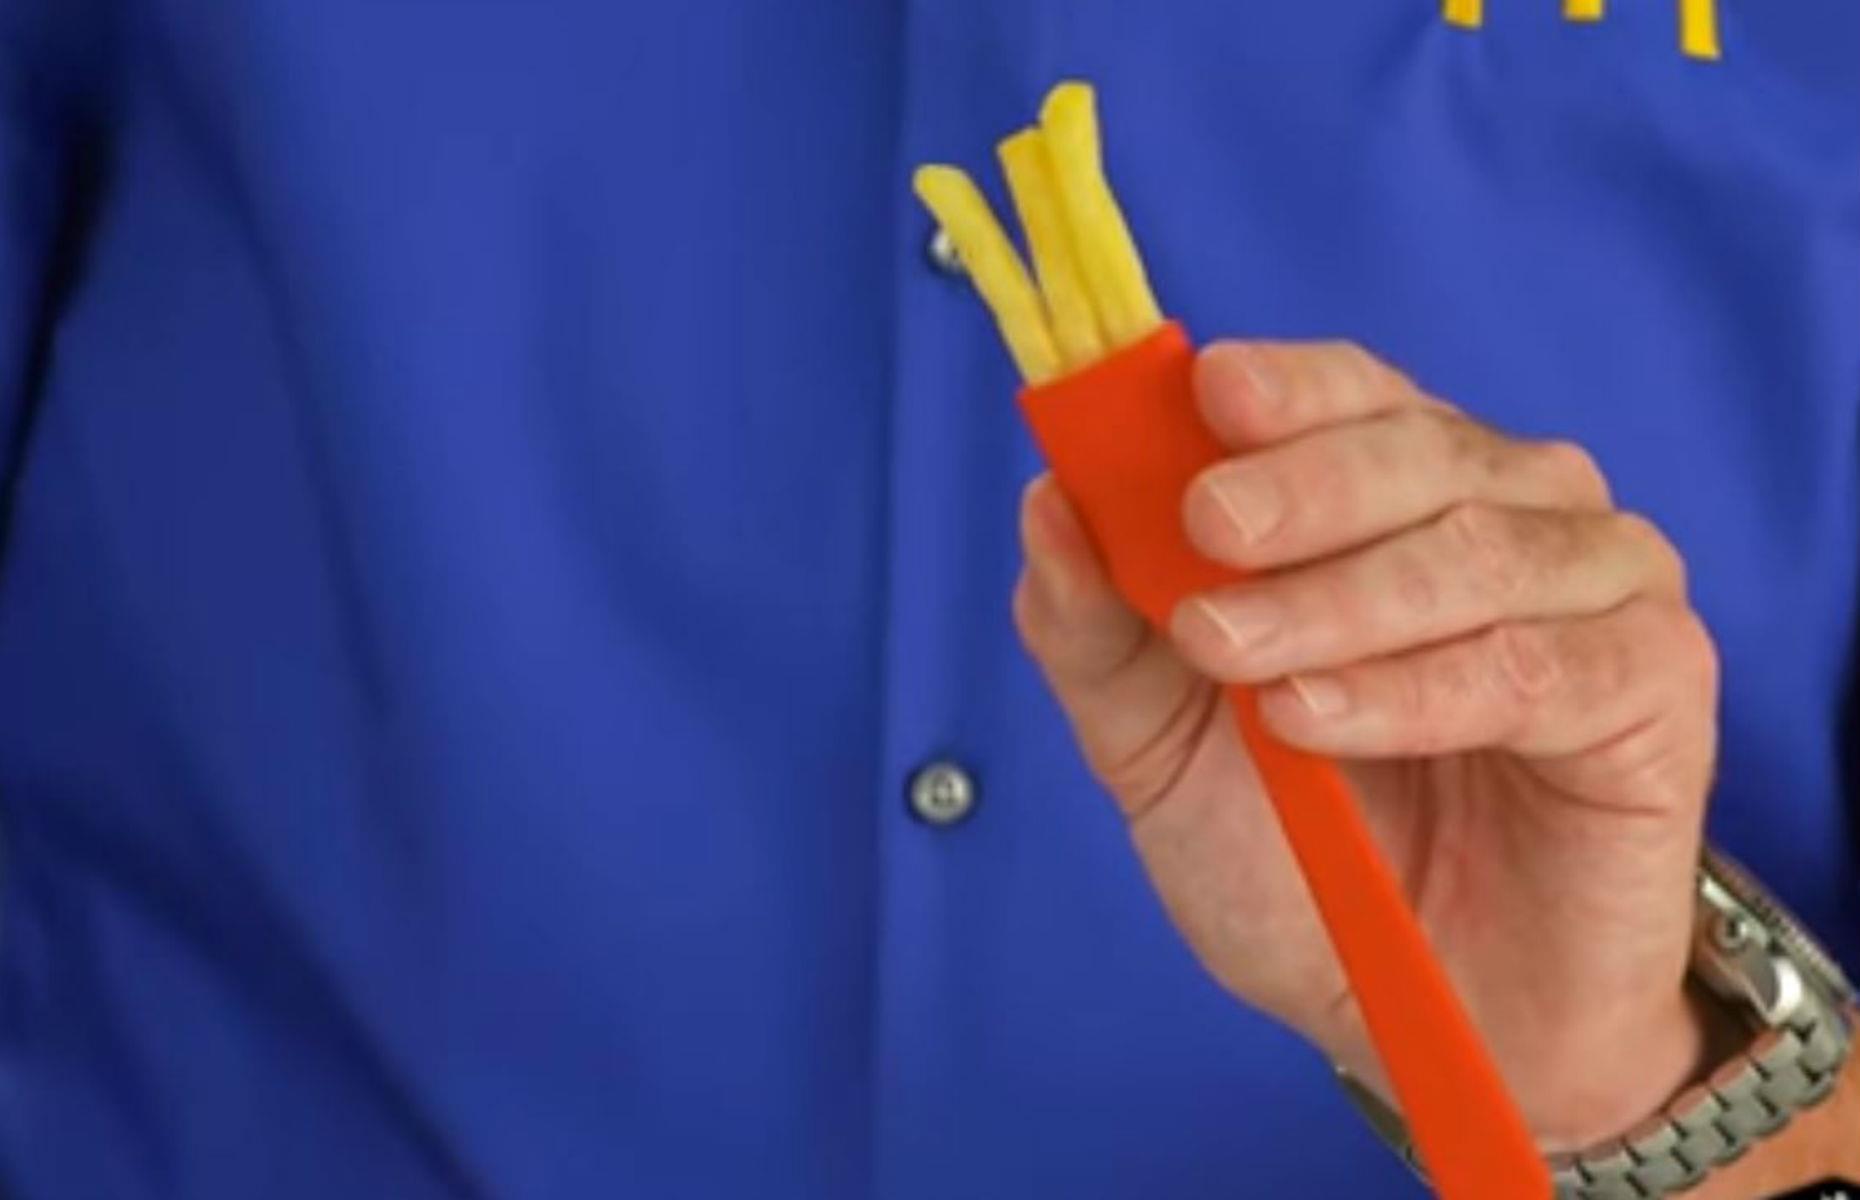 The utensil you never thought you’d need